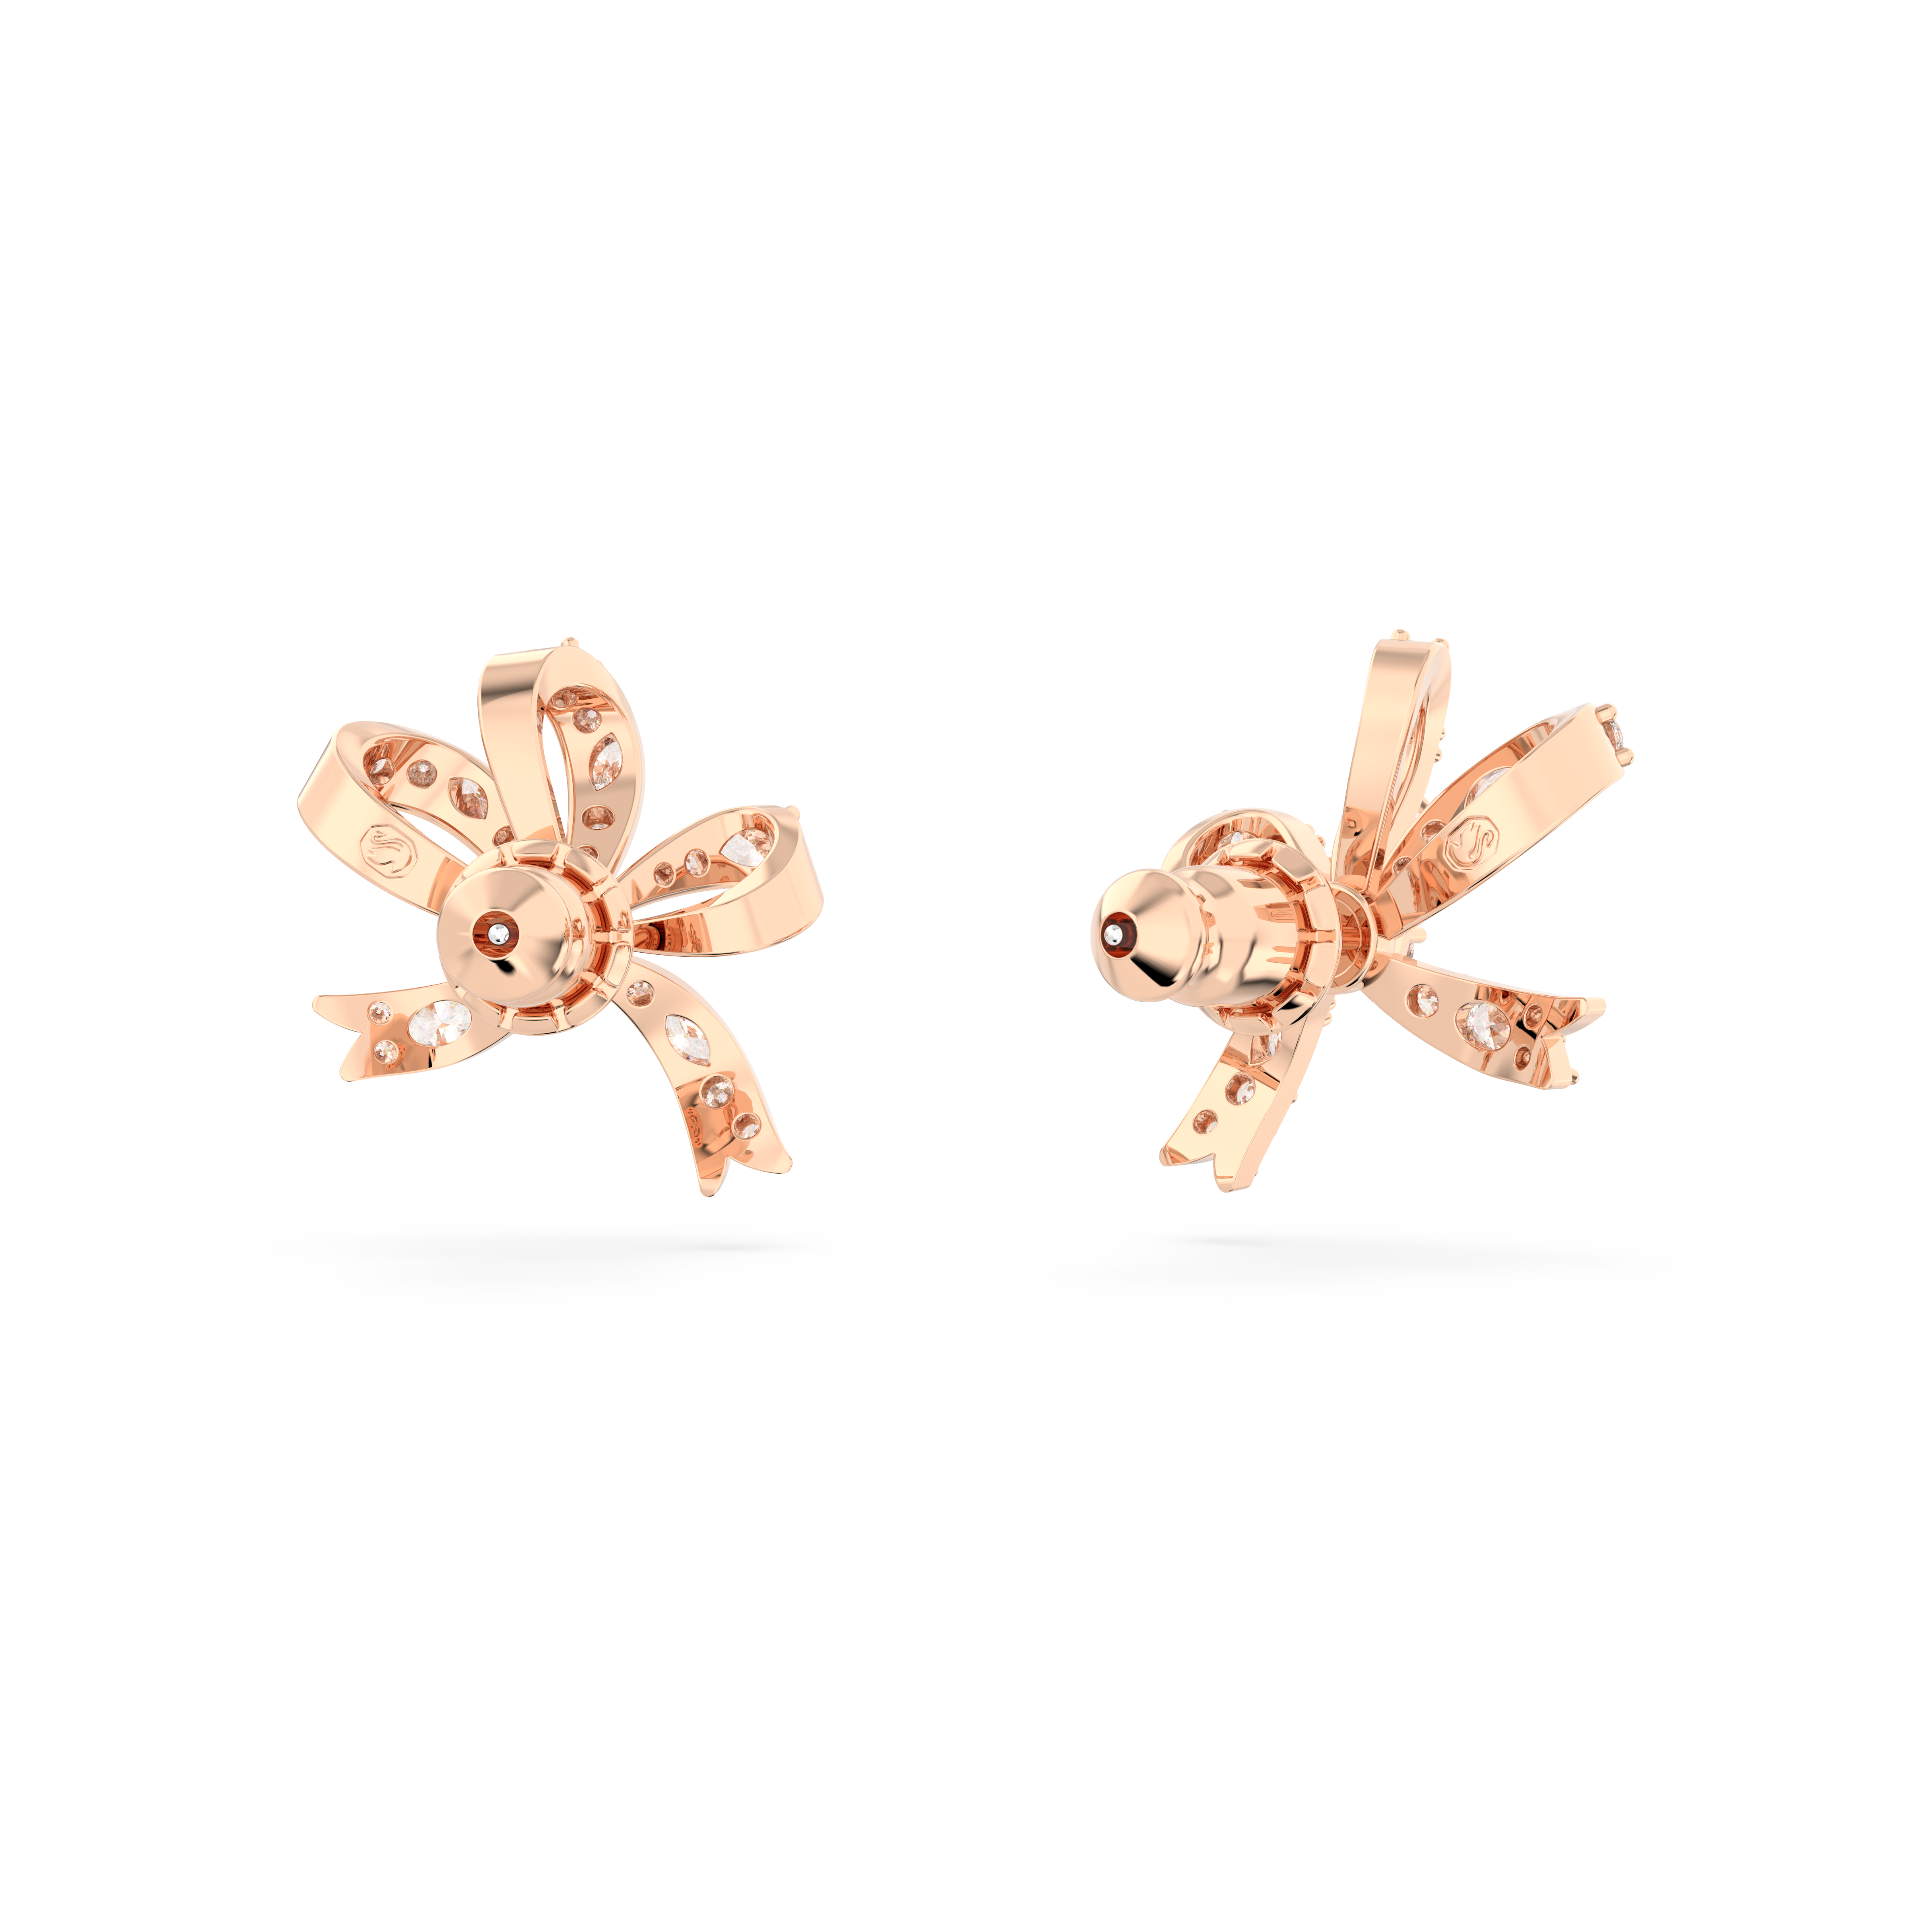 SWAROVSKI VOLTA STUD EARRINGS, BOW, SMALL, WHITE, ROSE GOLD-TONE PLATED 5647572